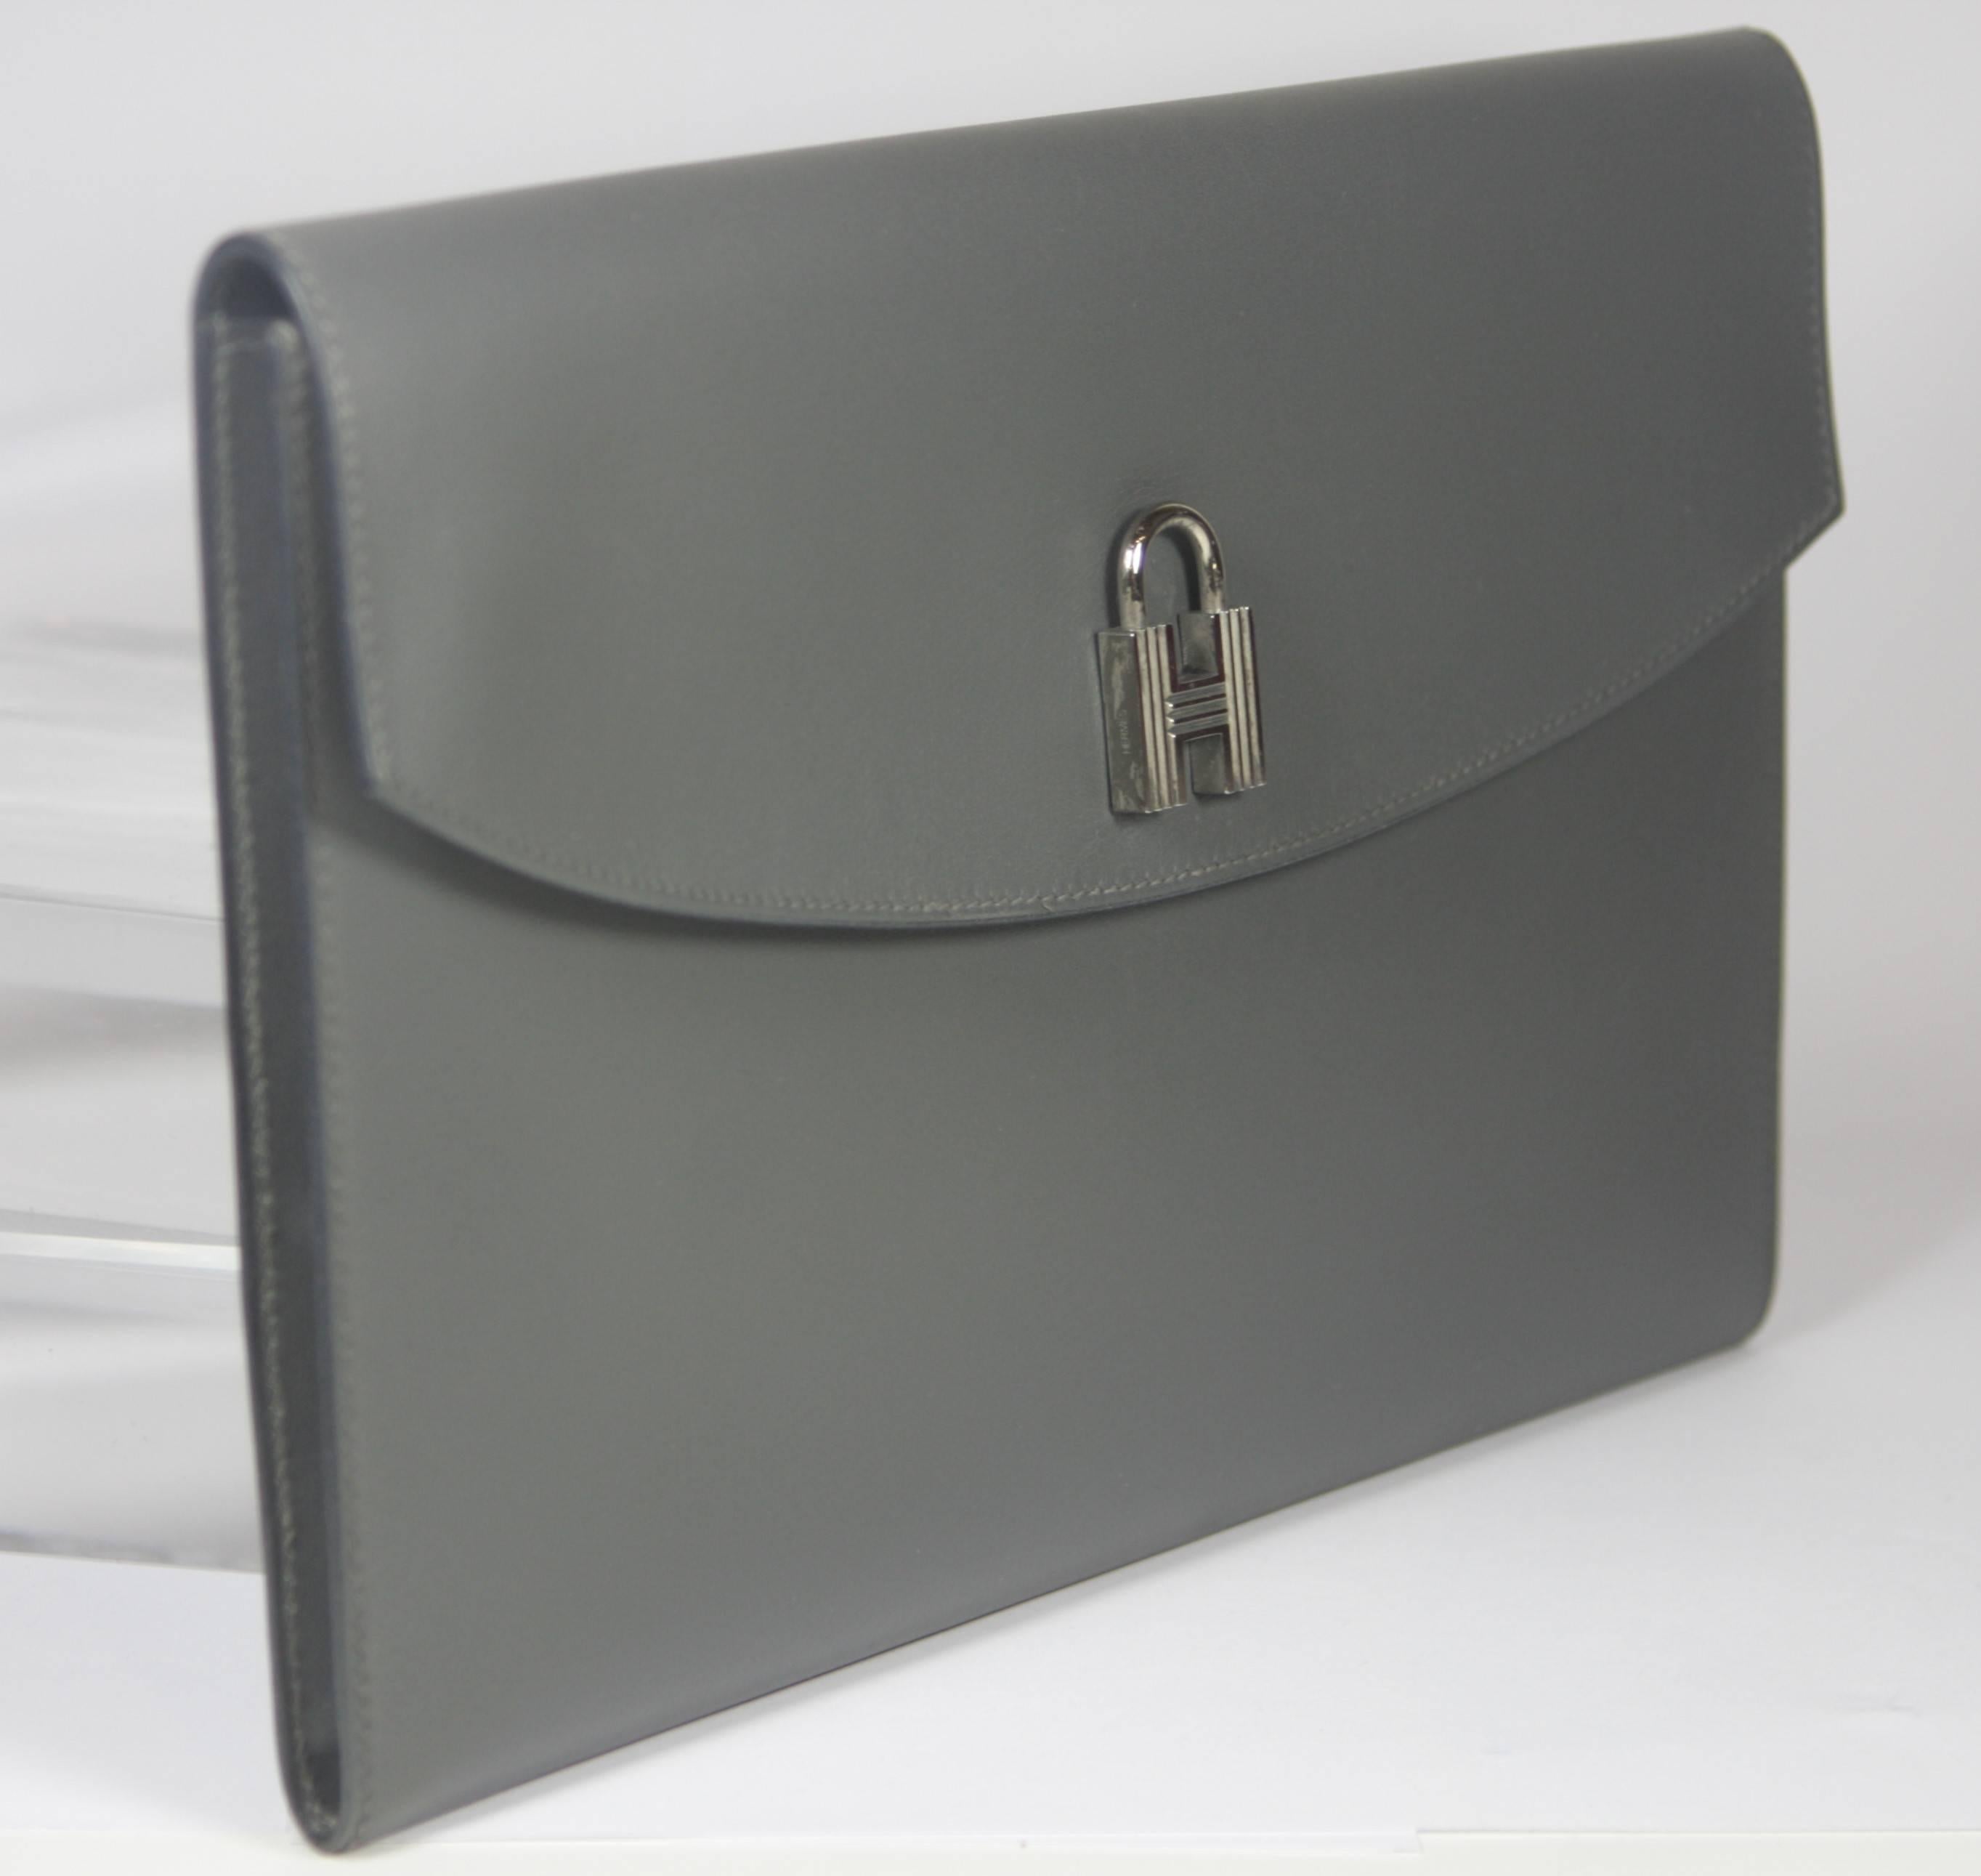 Women's HERMES Grey Leather Envelope Clutch with Silver Padlock Detail